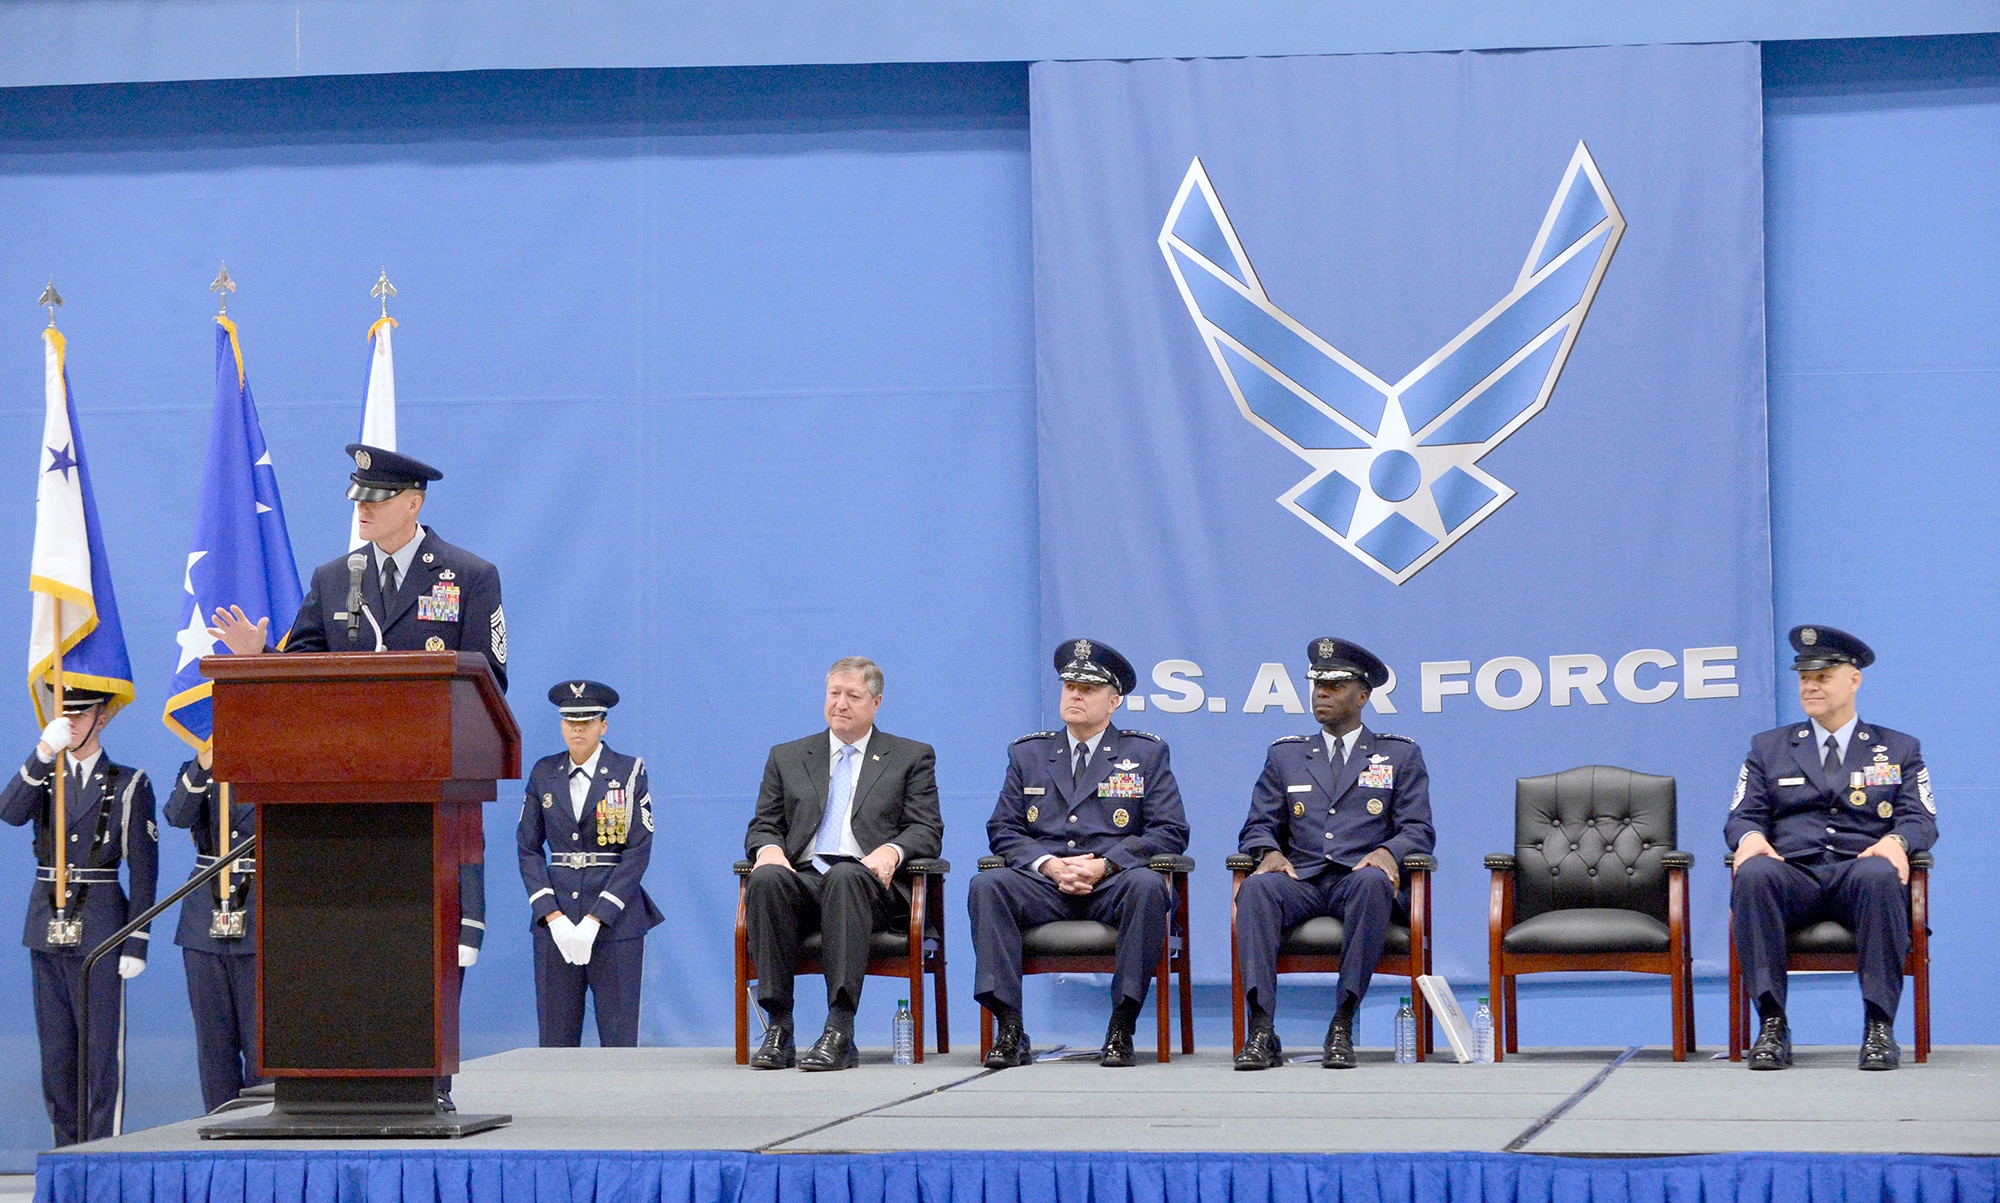 The 17th Chief Master Sgt. of the Air Force James Cody addresses the audience in attendance at assuming his new position at Joint Base Andrews, Md., on Jan 24, 2013.  Cody talked about looking forward to getting to the bases, meeting Airmen and working their challenges. (U.S. Air Force photo/Scott M. Ash)